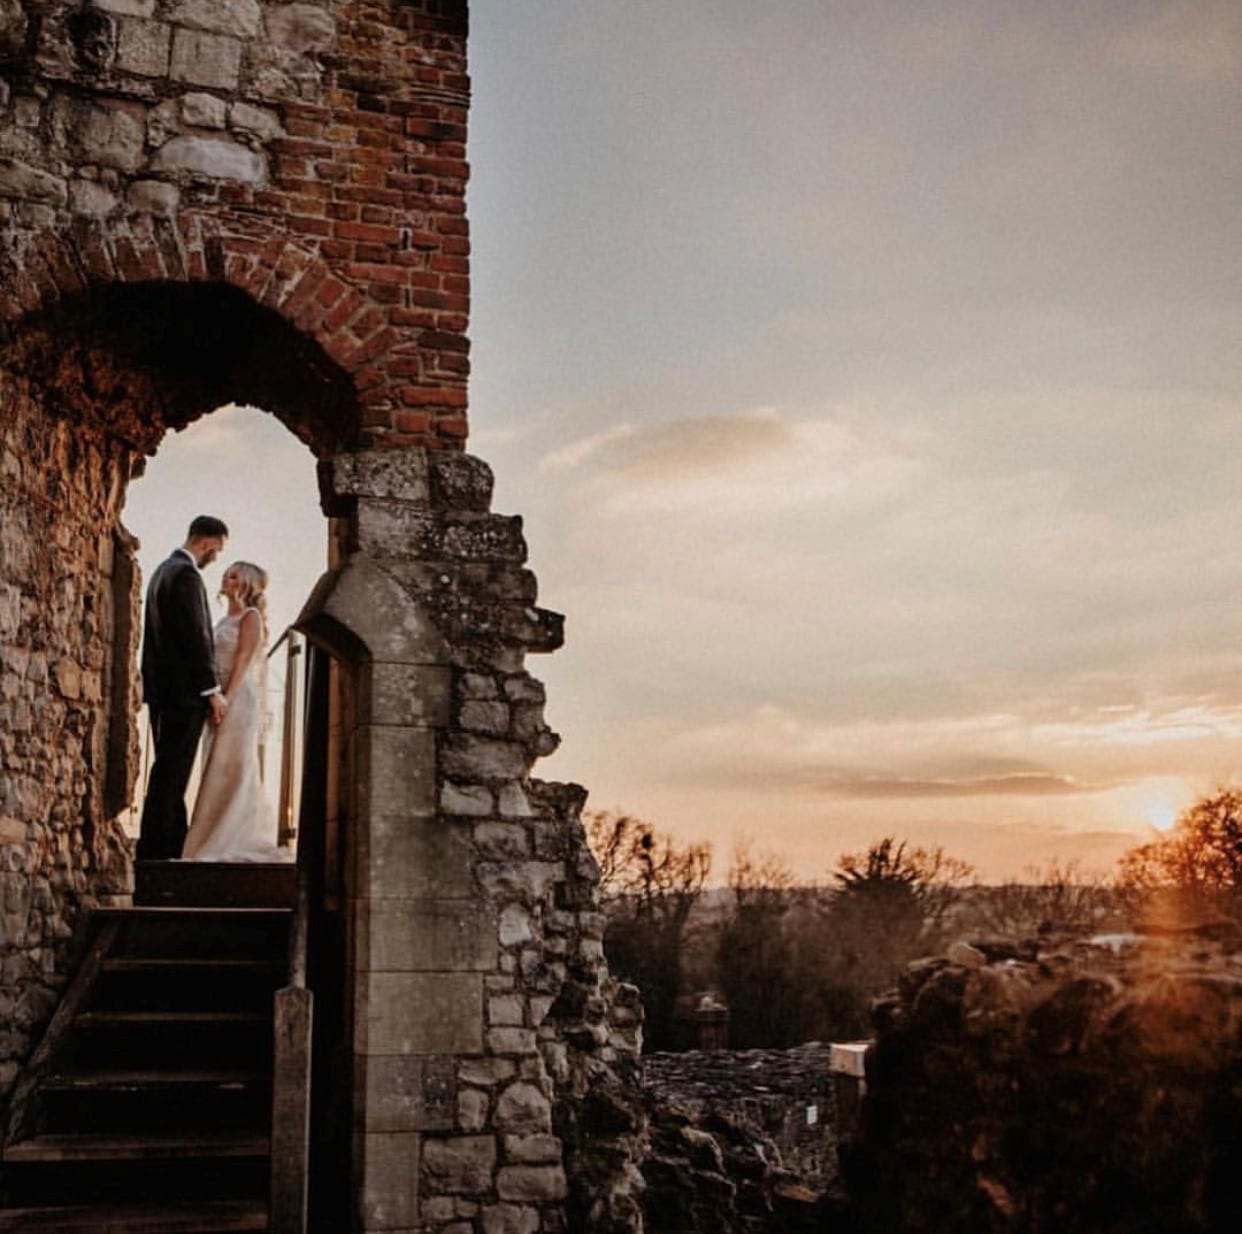 Wedding couple standing within Farnham Castle Keep at sunset